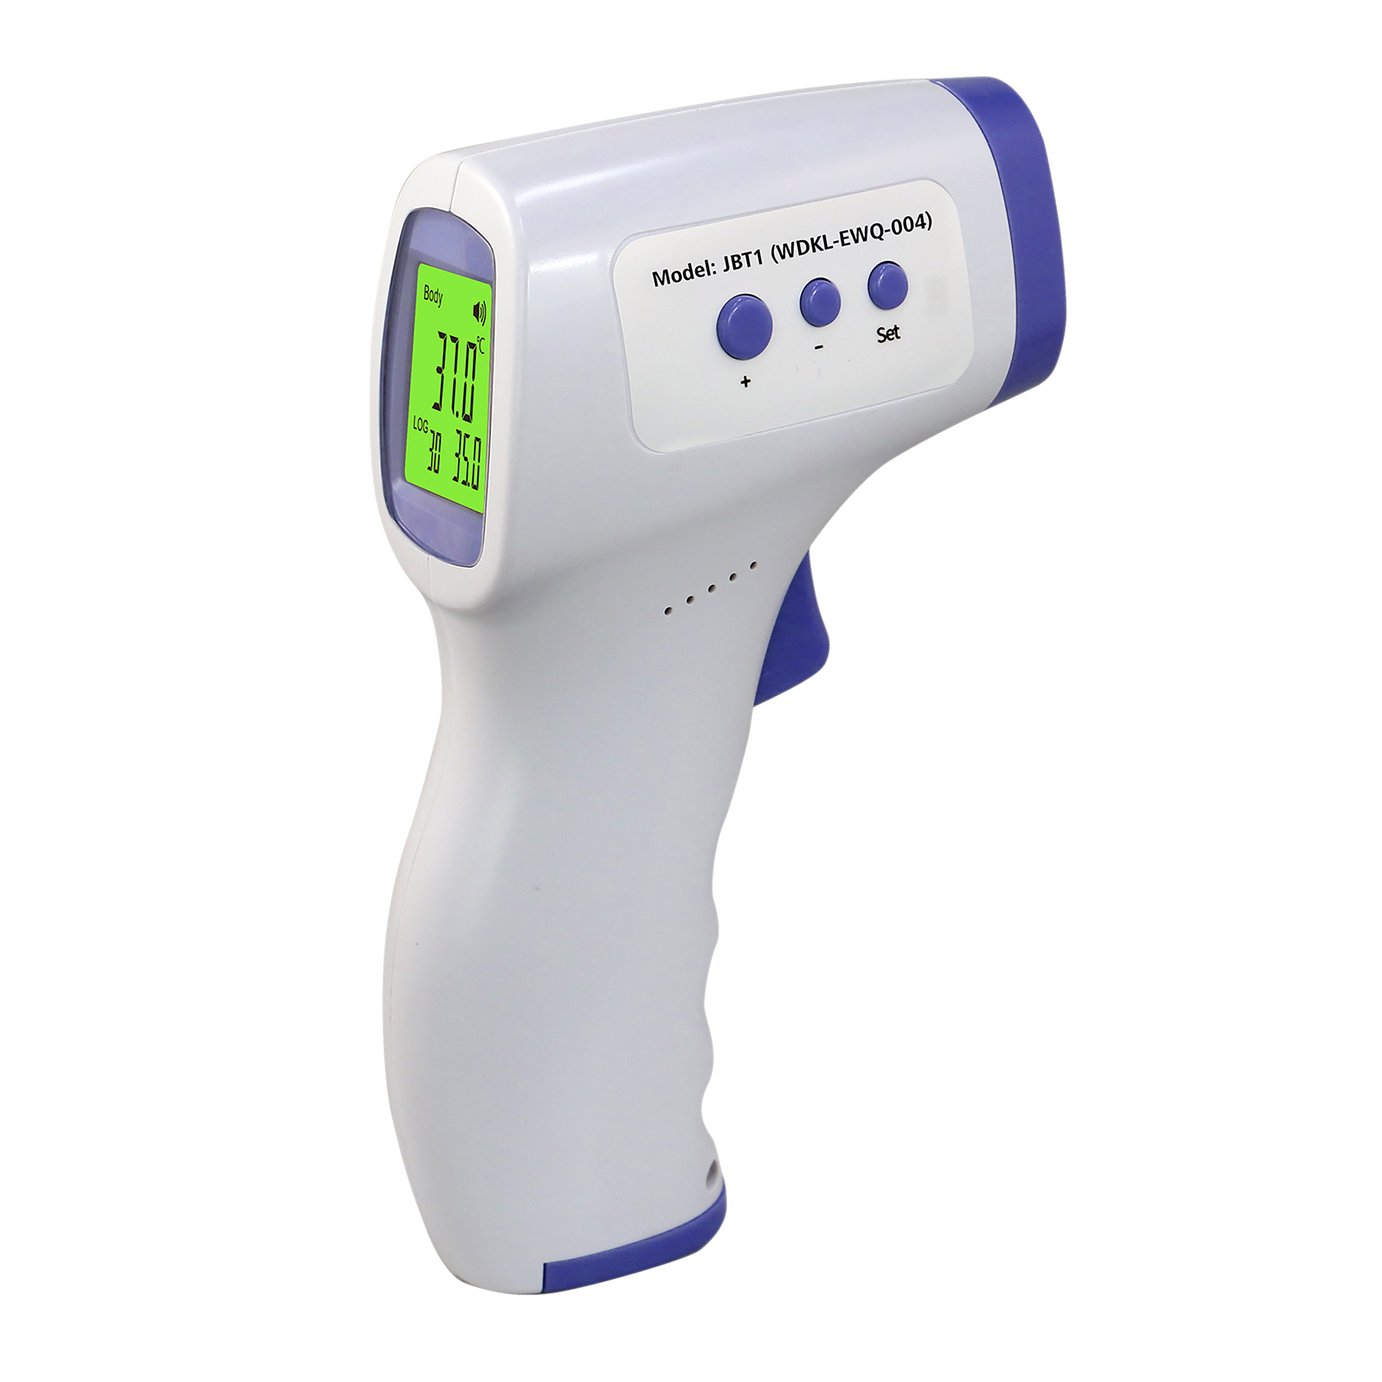 Jabees JBT1 None Contact Thermometer Review